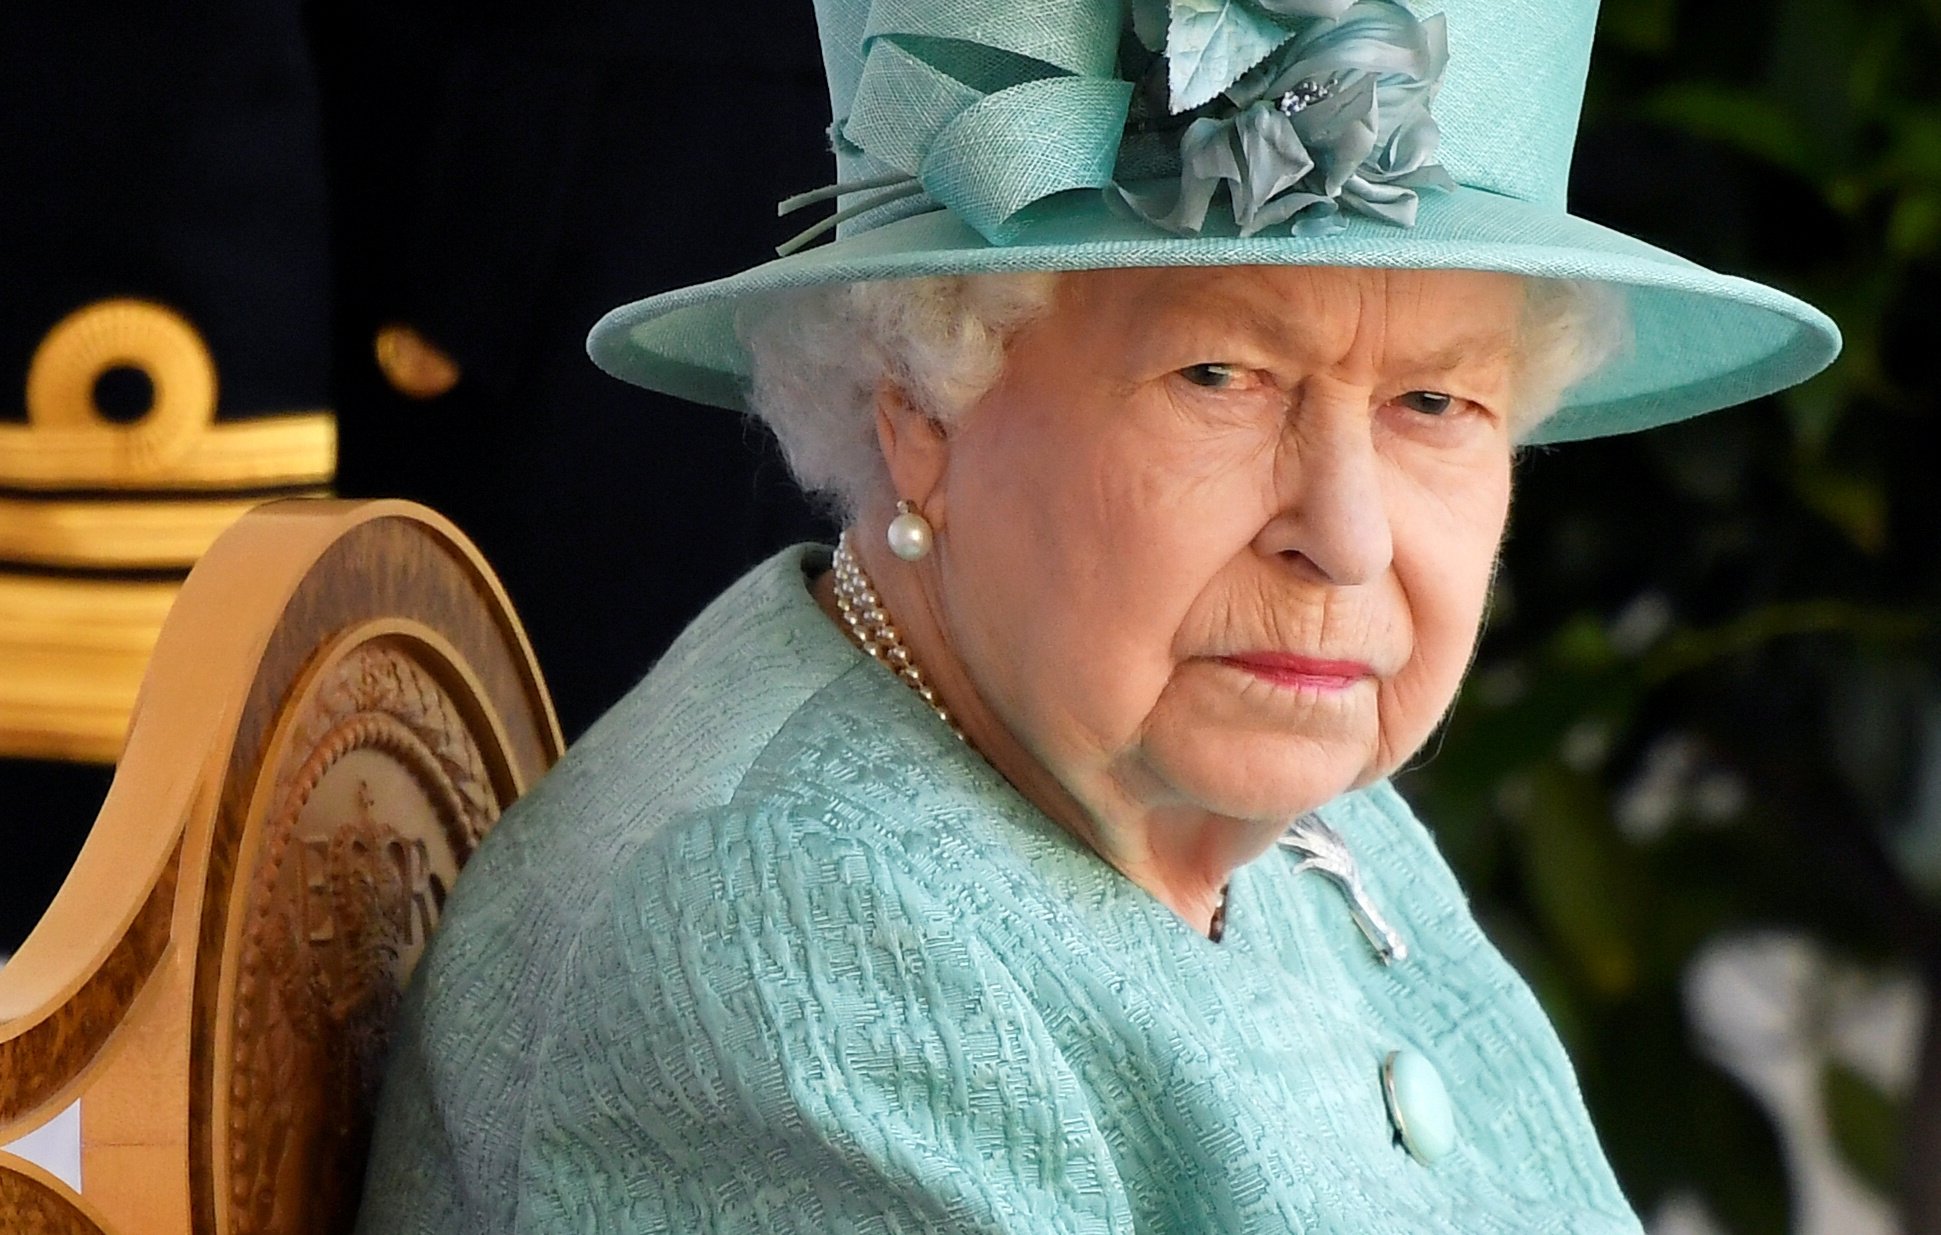 Queen Elizabeth II having a 'rough' time amid family changes | Daily Sabah